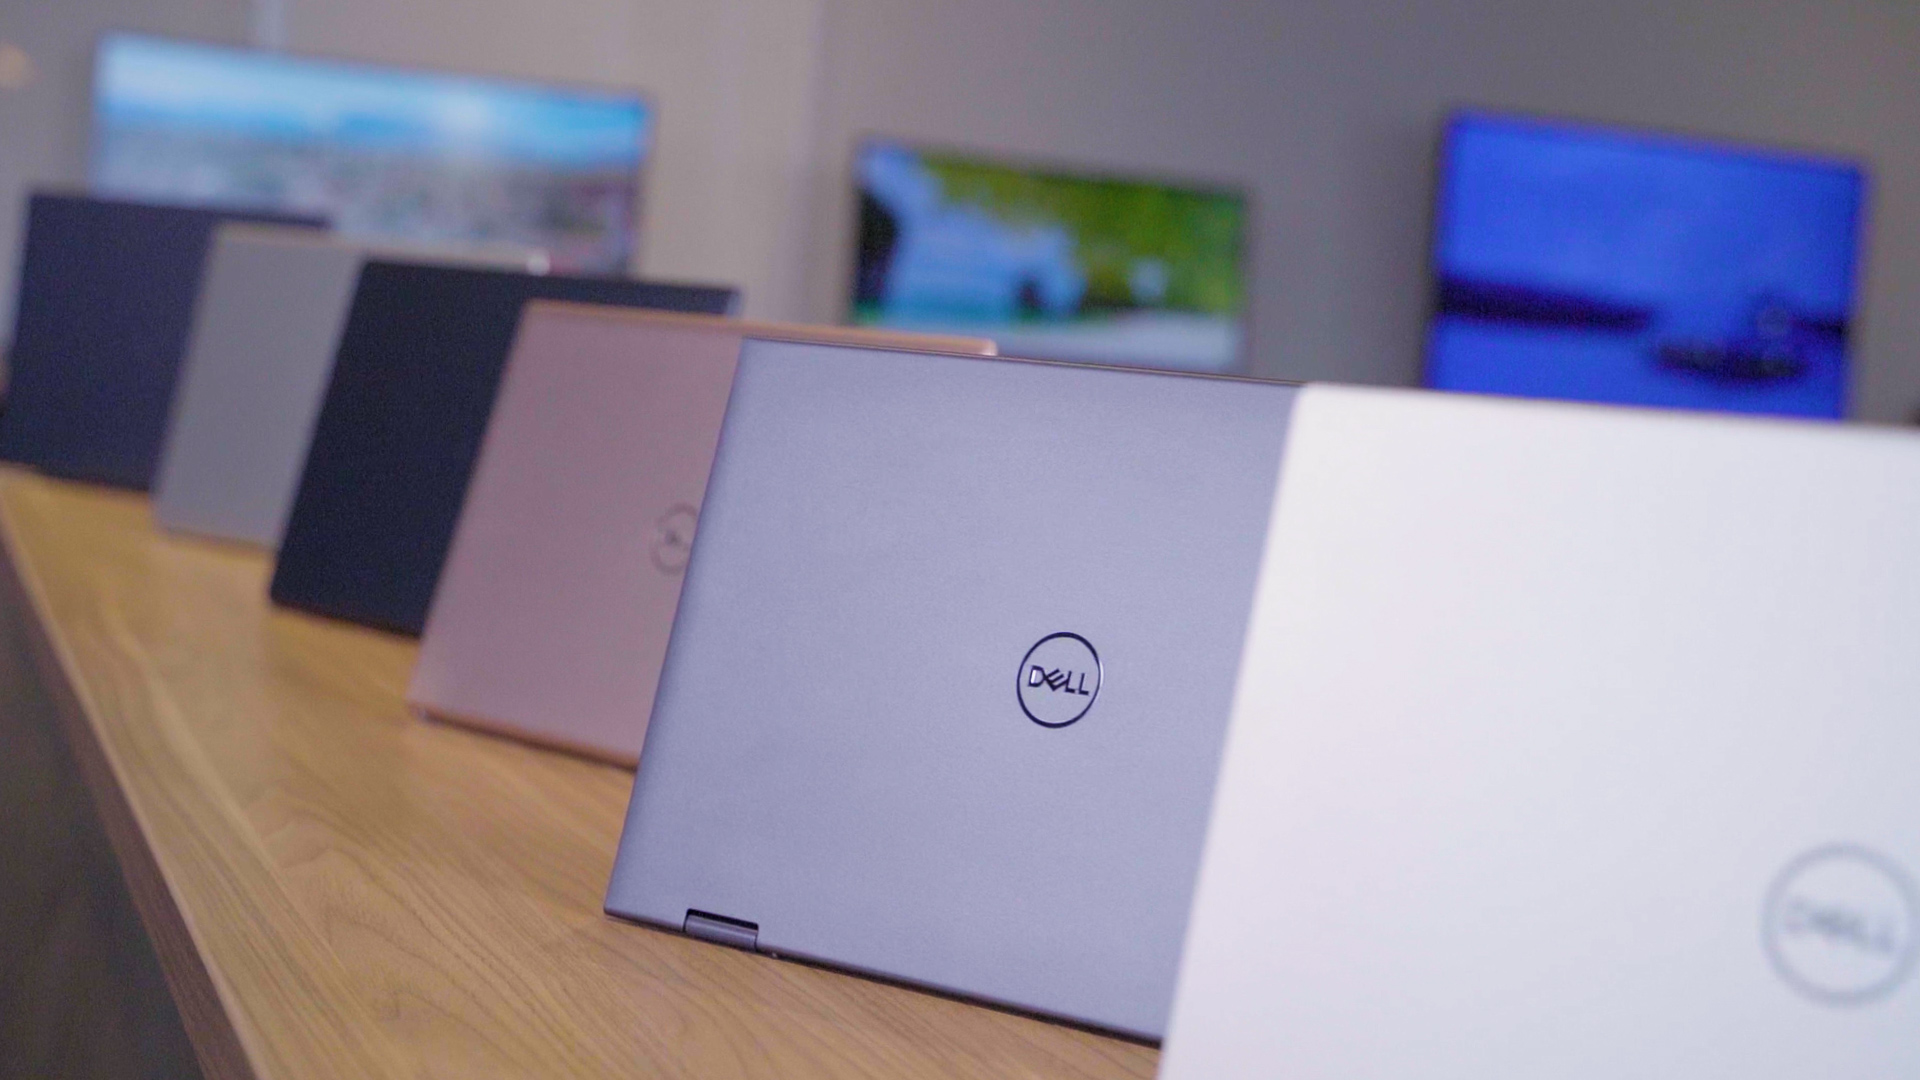 Dell refreshes the Inspiron 13/14/15 models with Tiger Lake-H CPUs and  Nvidia MX450 dGPUs - NotebookCheck.net News